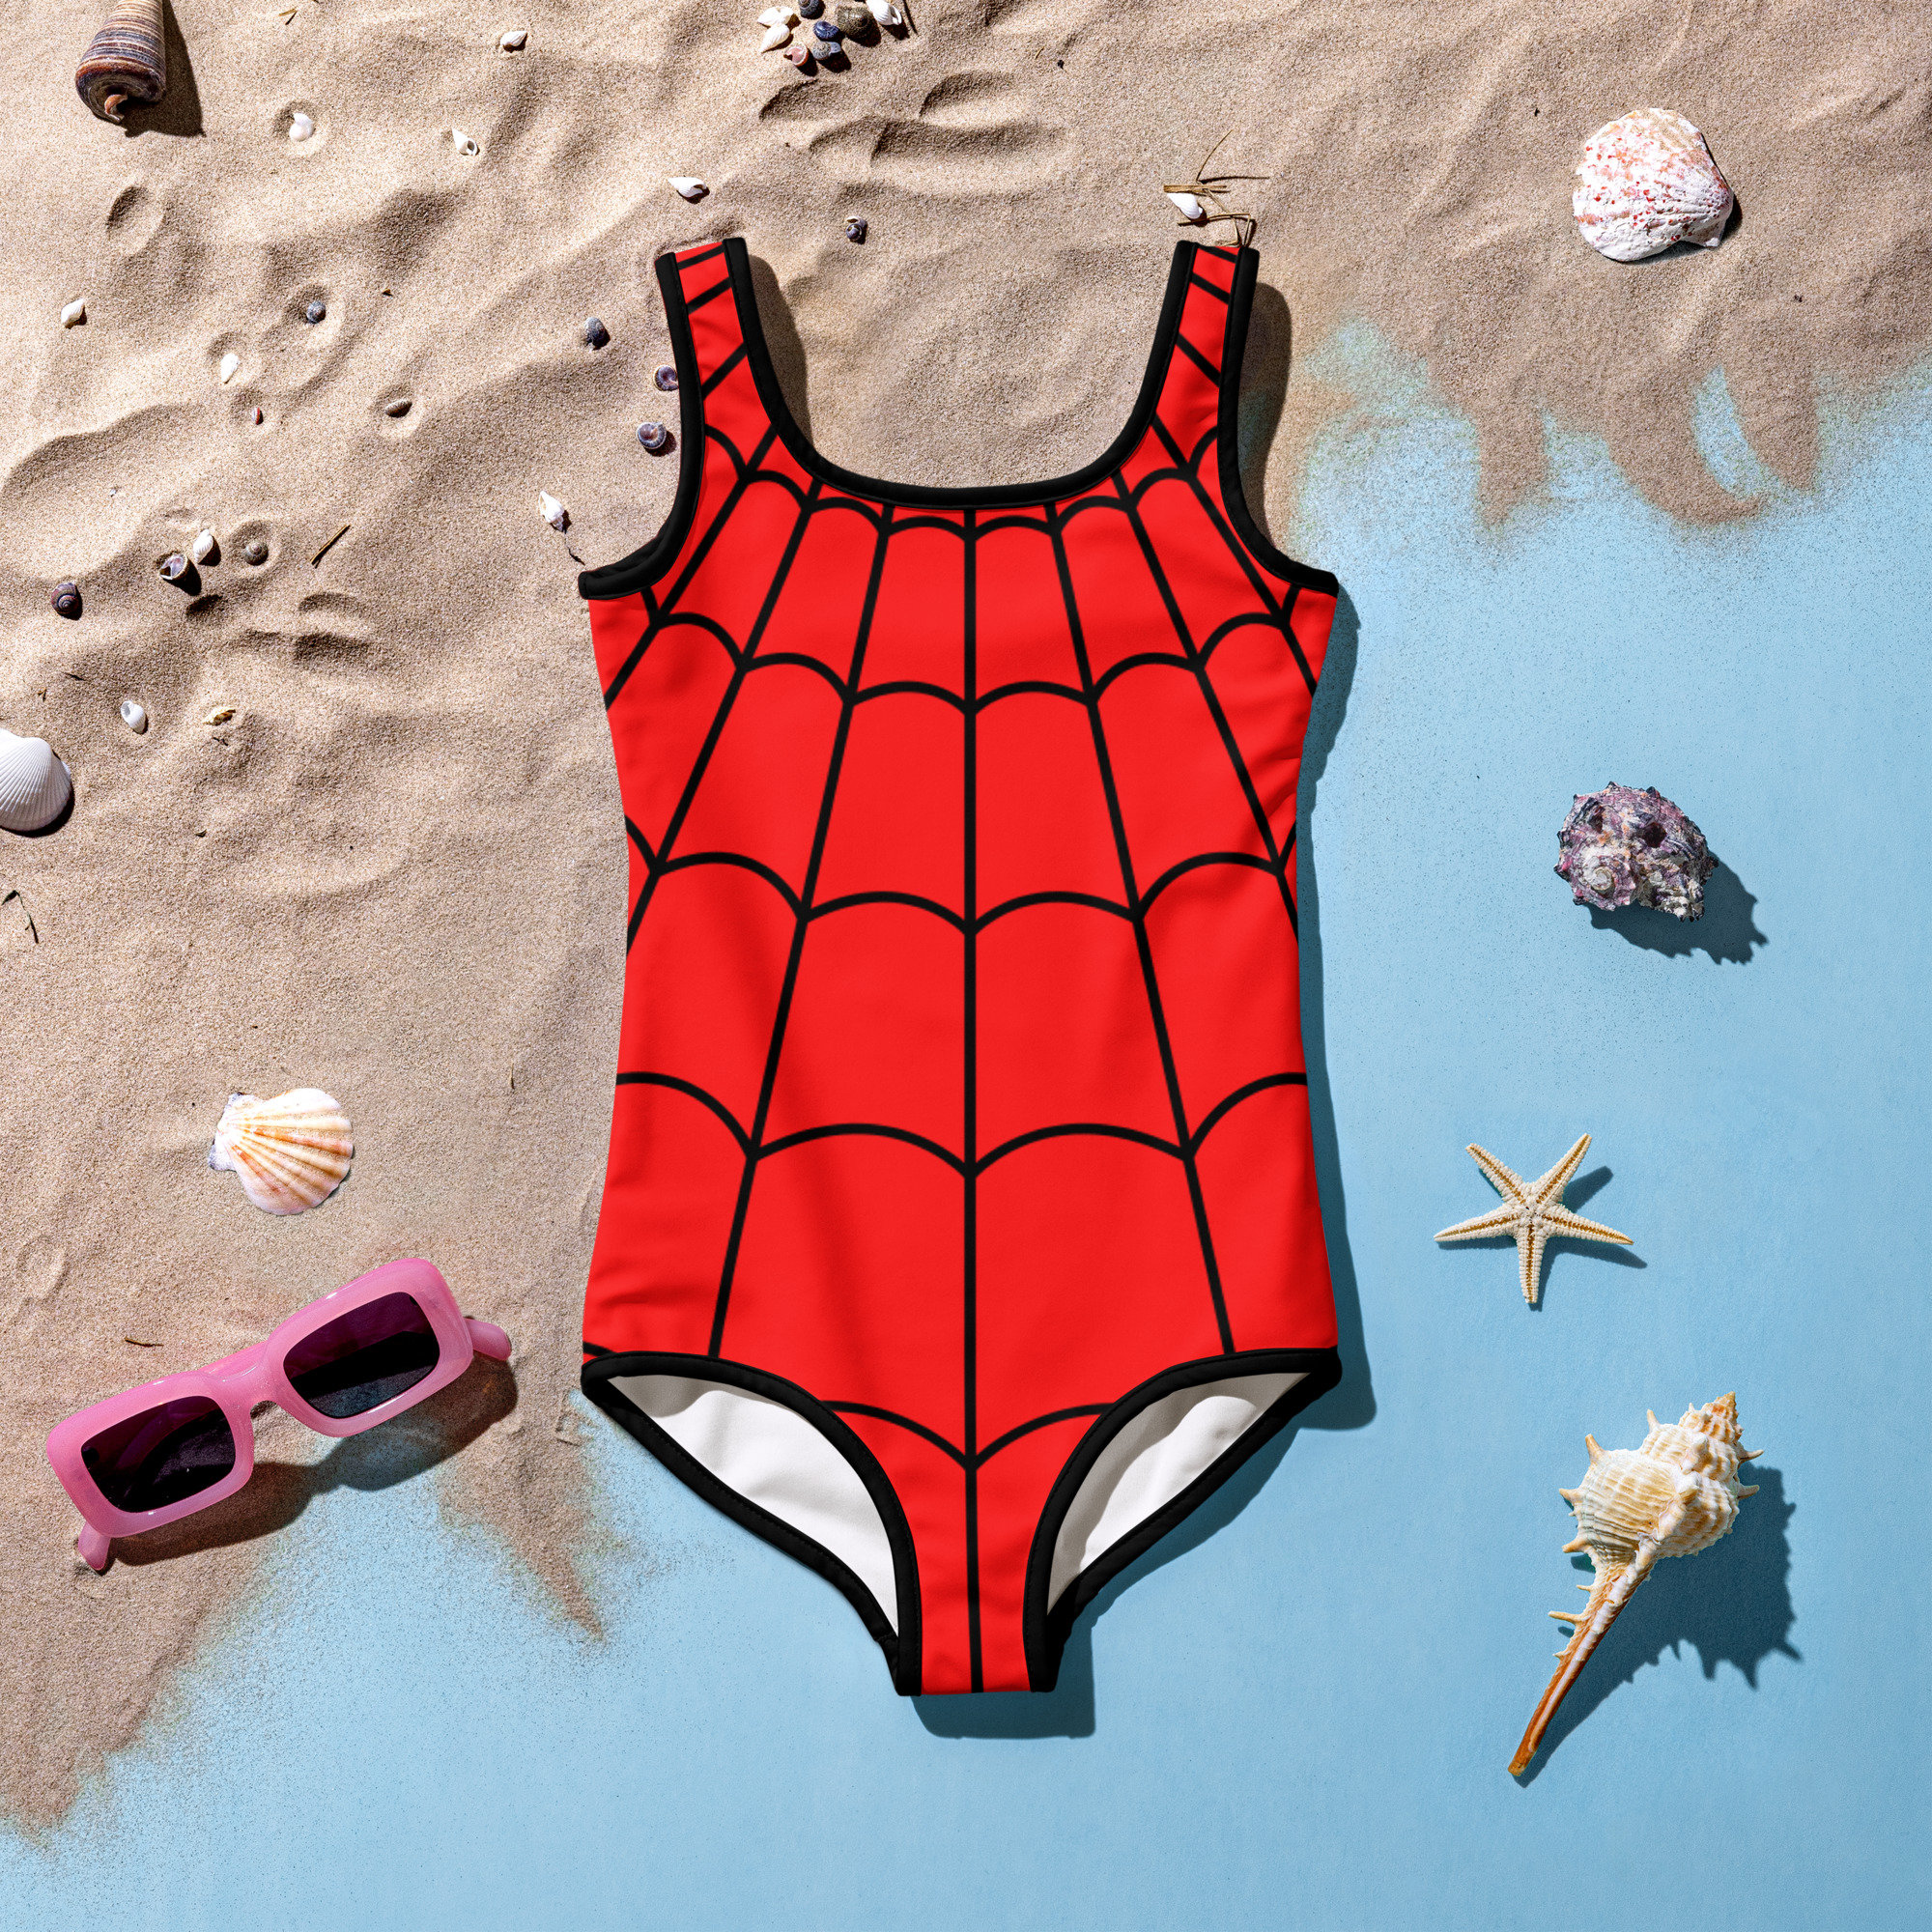 Teen Sizing SPIDER WEB SWIMSUIT All-over Print Youth Swimsuit Red Spider  Girl Spidergwen Gwen Beach Pool Party Superhero Swimsuit, Costume -   Denmark